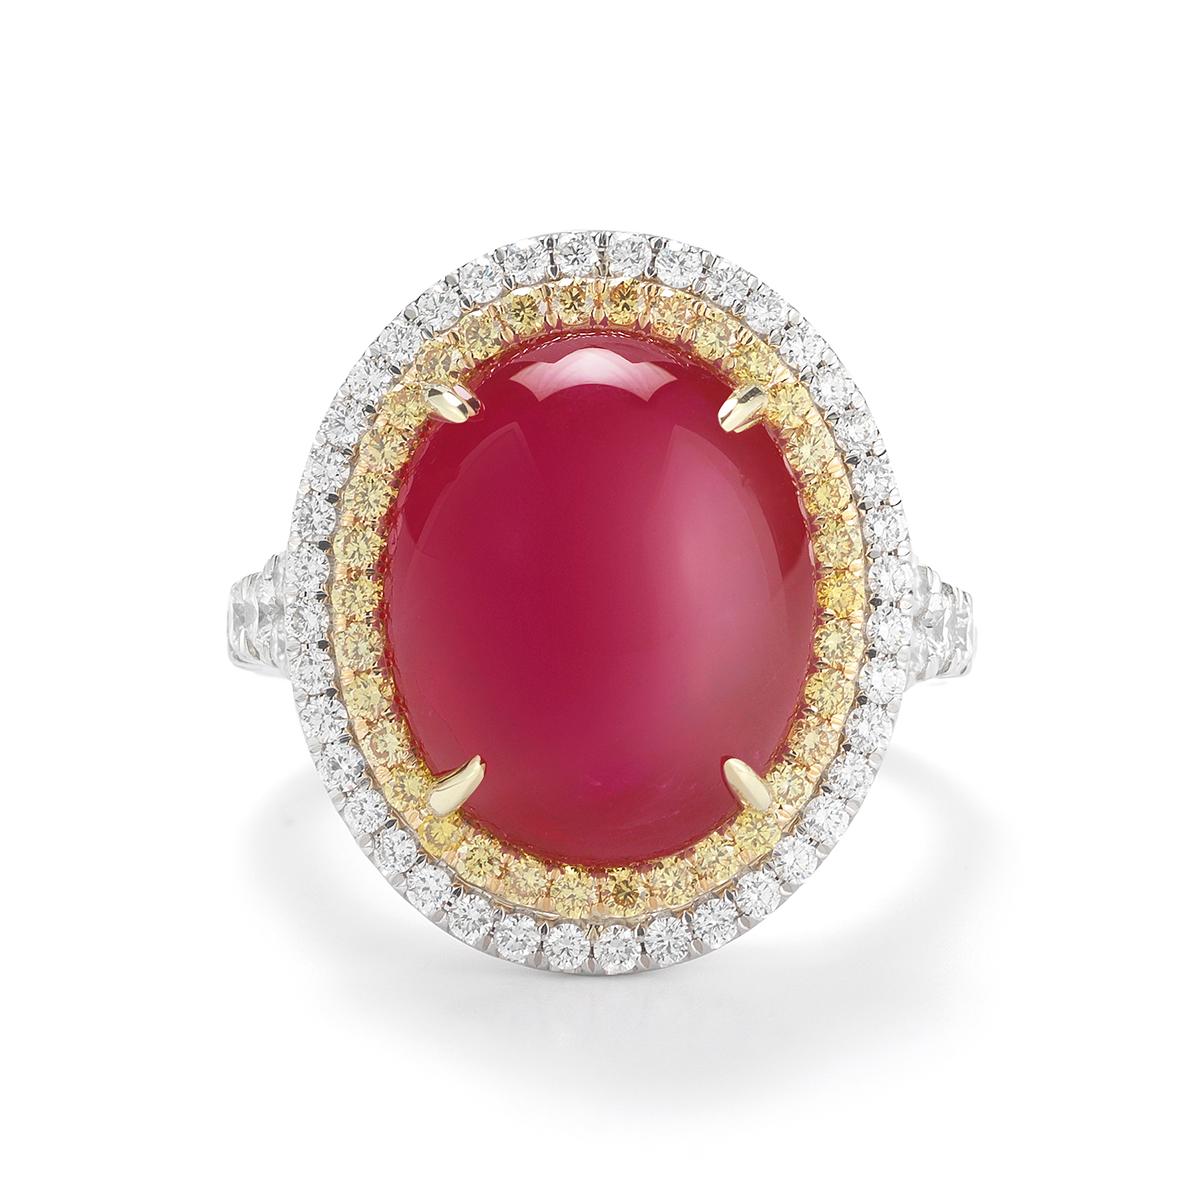 RUBY CABOCHON RING WITH DIAMONDS
A luscious Burmese Ruby takes the focus of this beautiful ring featuring yellow and white diamond halos.
Item:	# 02654
Setting:	Platin;18K
Lab:	        C.Dunaigre
Color Weight: 	 14.25 ct. of Ruby
Diamond